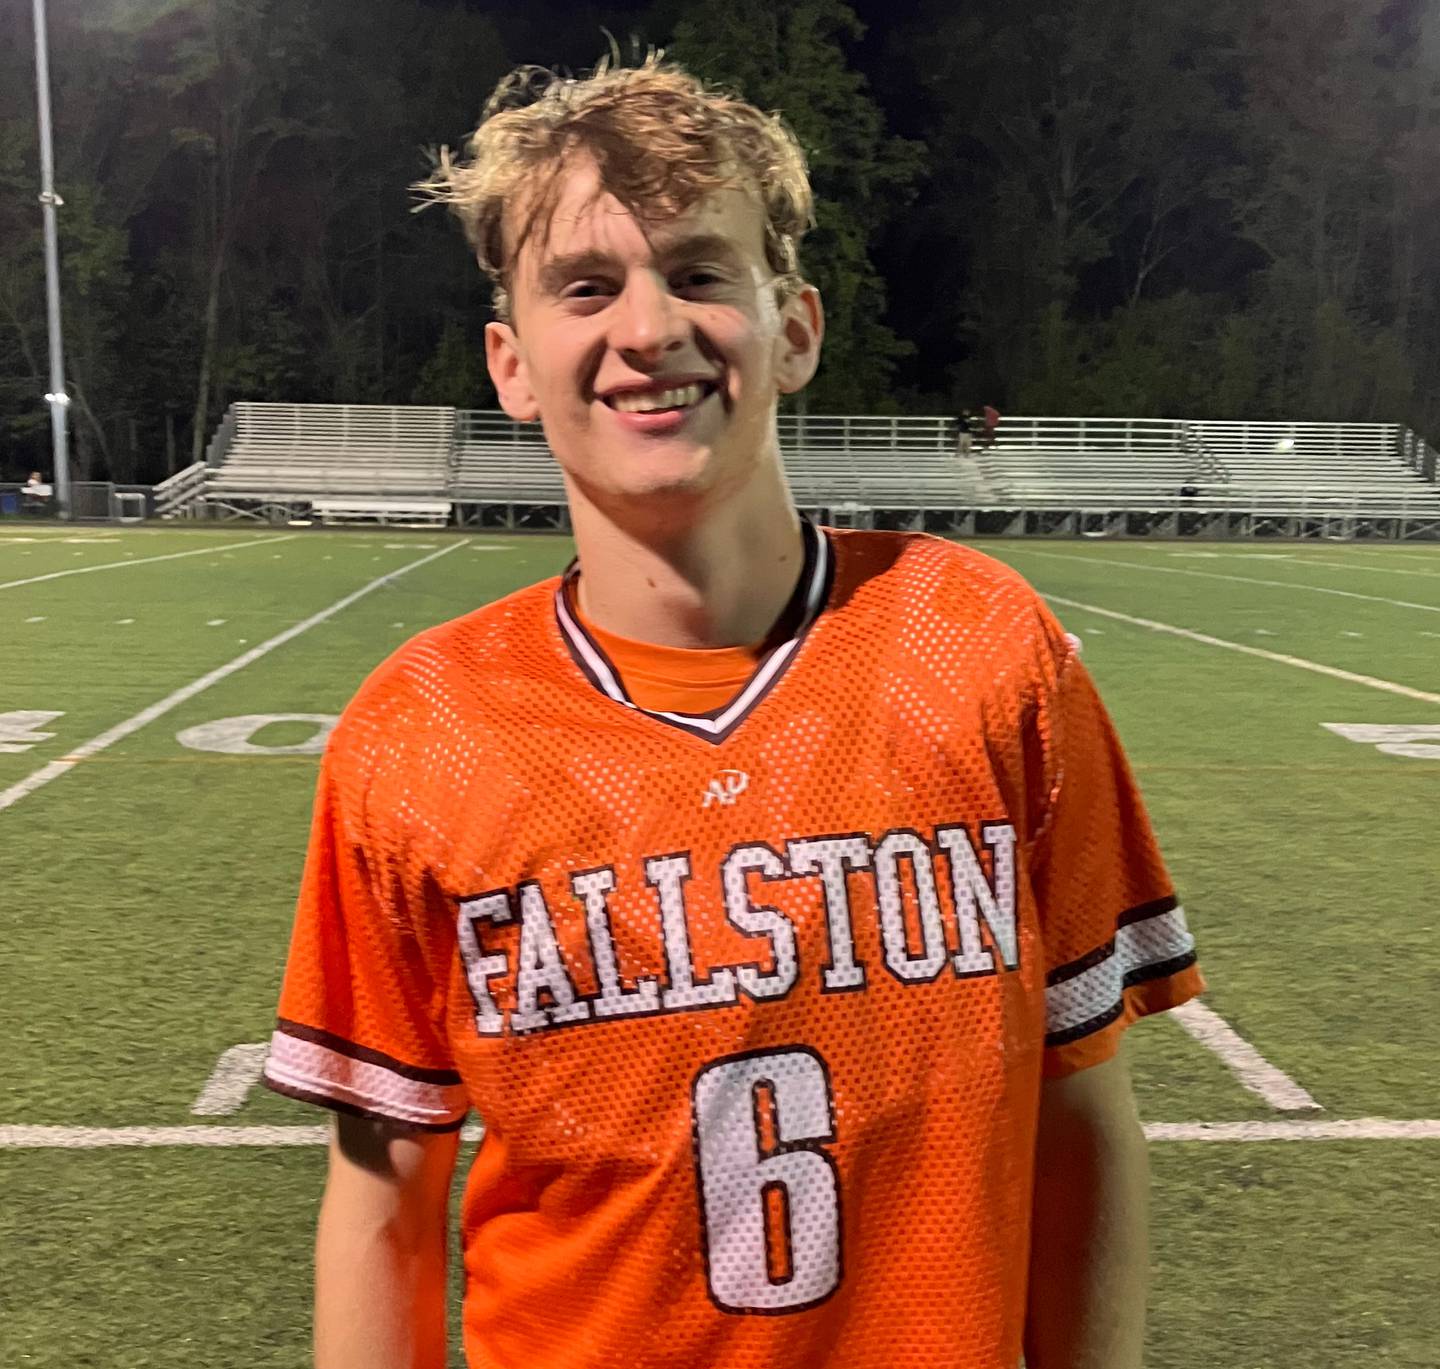 Jacob MacMillan helped Fallston clinch the UCBAC Chesapeake boys lacrosse title Wednesday evening. The junior attack finished with 4 goals and an assist as the Cougars defeated C. Milton Wright in Harford County.